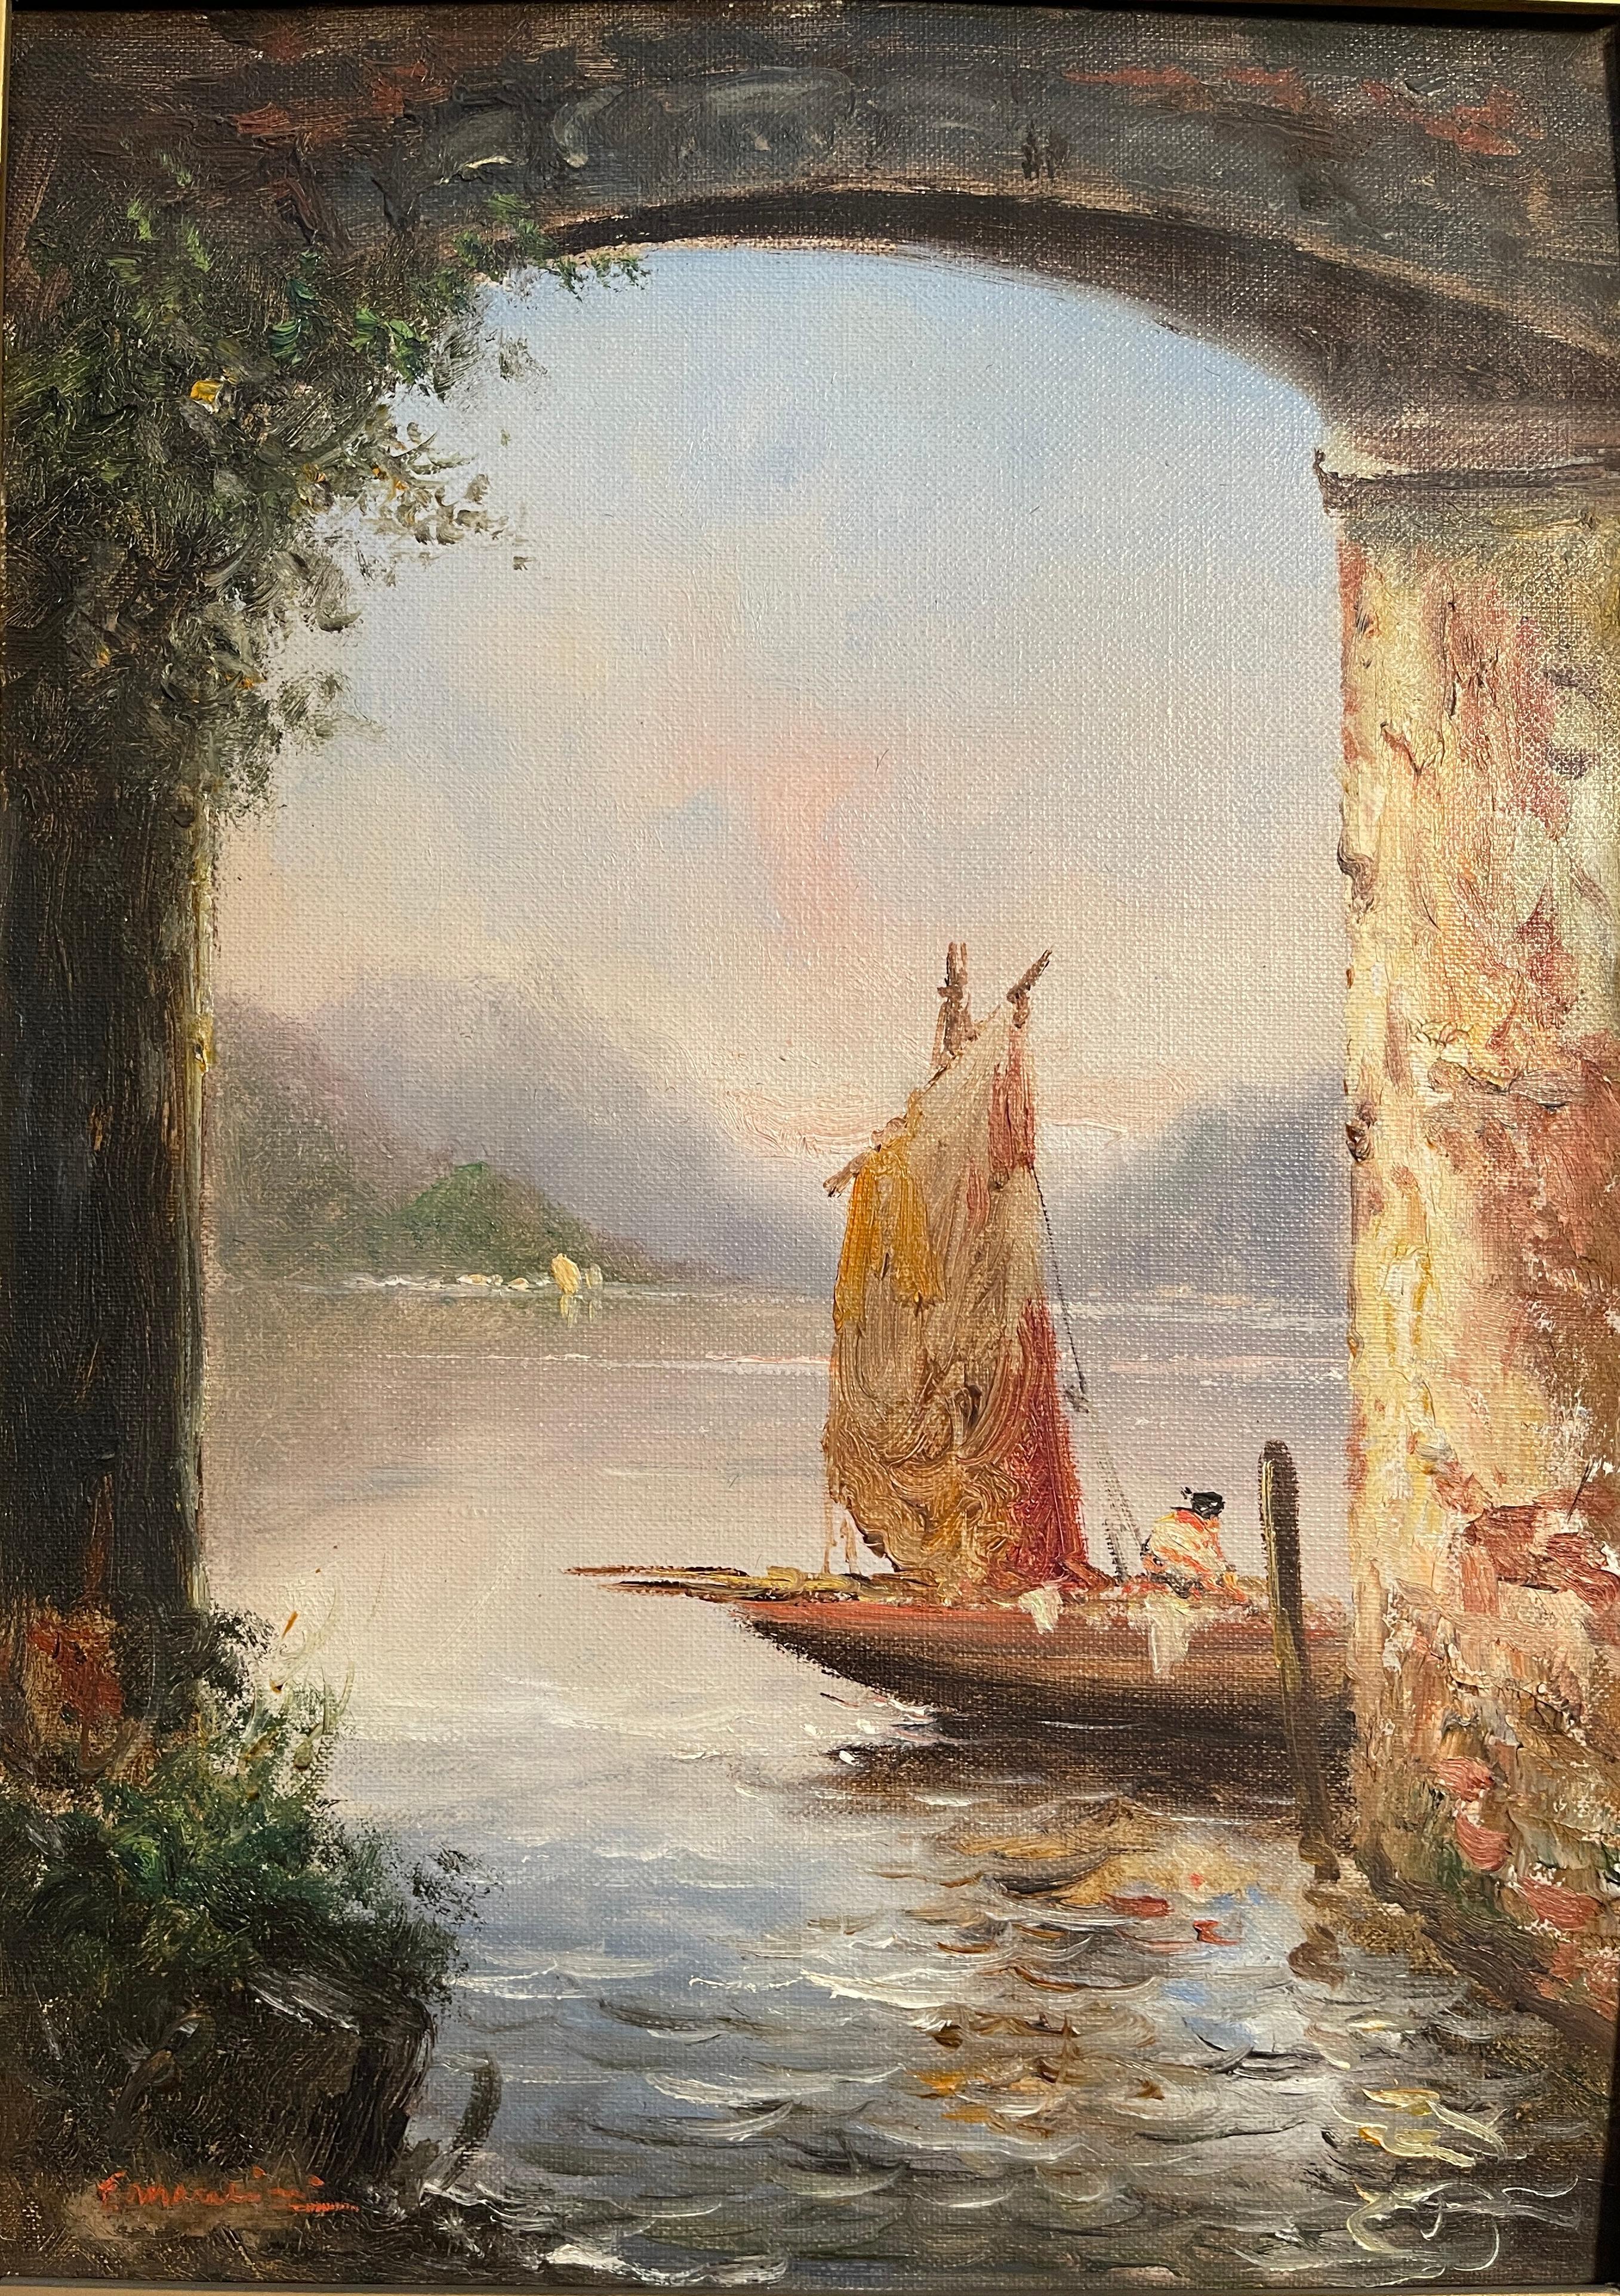 Ancient oil painting on wood, glimpse of a lake landscape, F. Mancini, 19th century
Fascinating glimpse of a lake view created and signed by Francesco Mancini (1830-1905), it represents a moored boat in the foreground and the lake shore in the